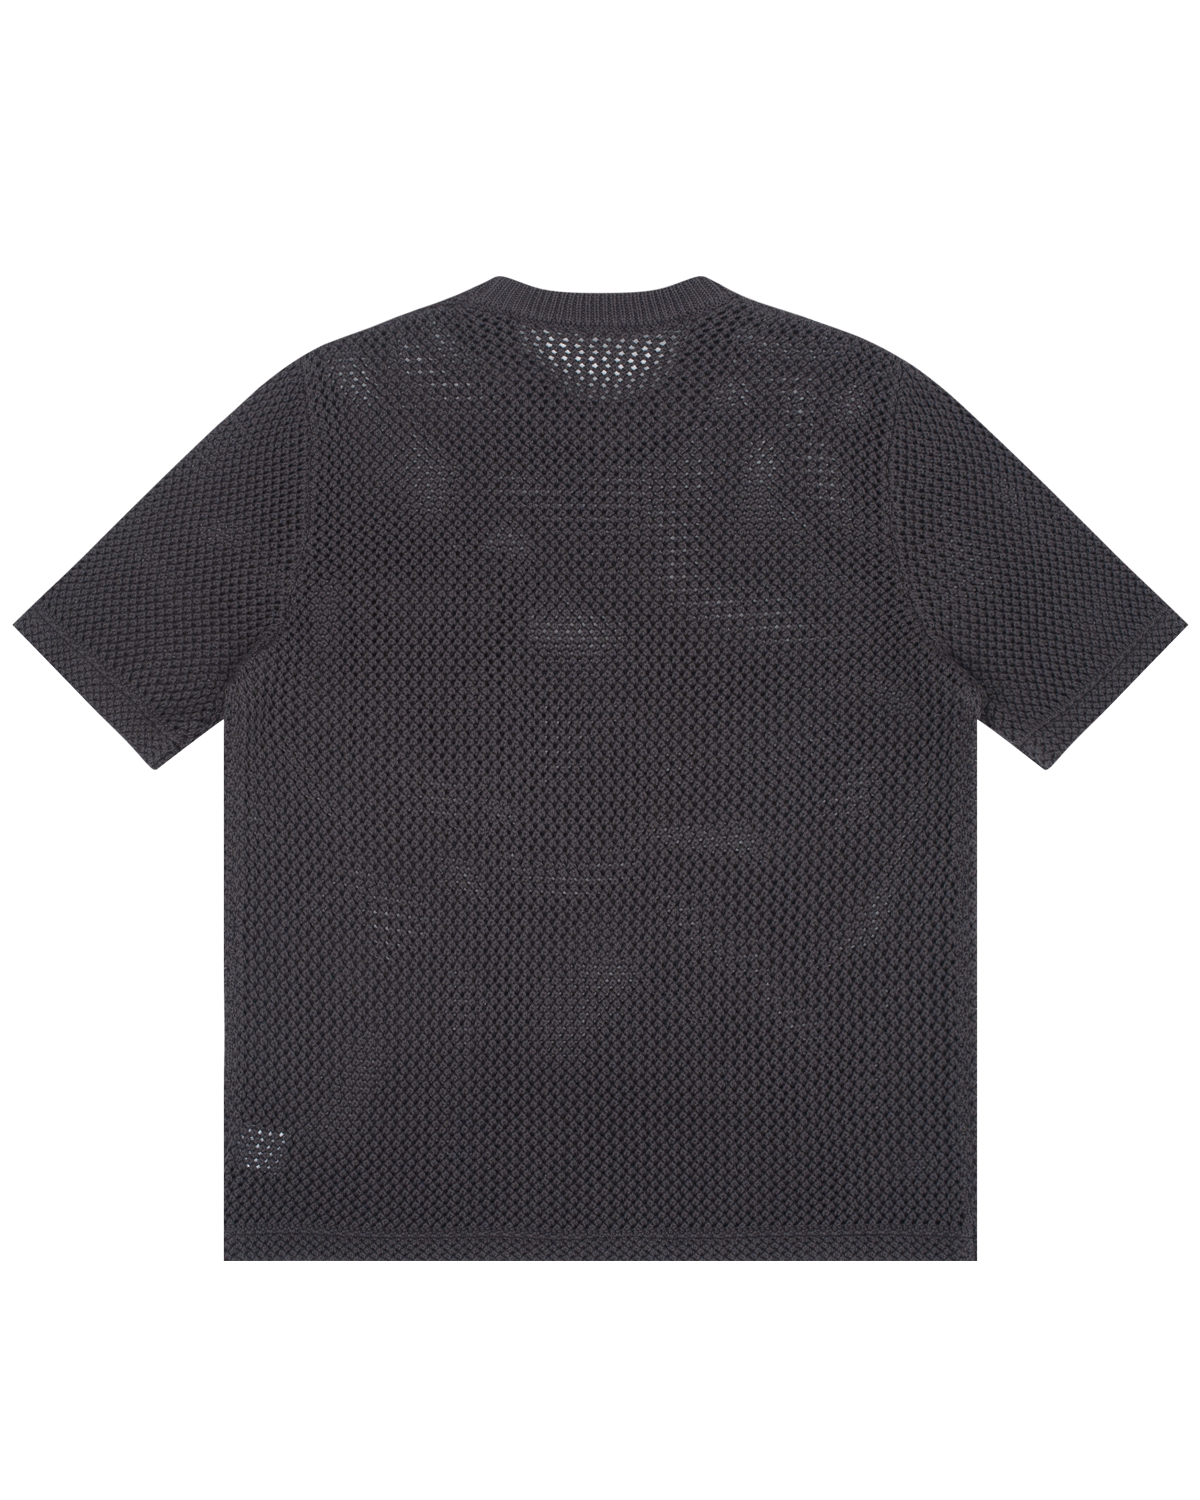 Off The Label hybrid structures short-sleeve knitted t-shirt dark grey